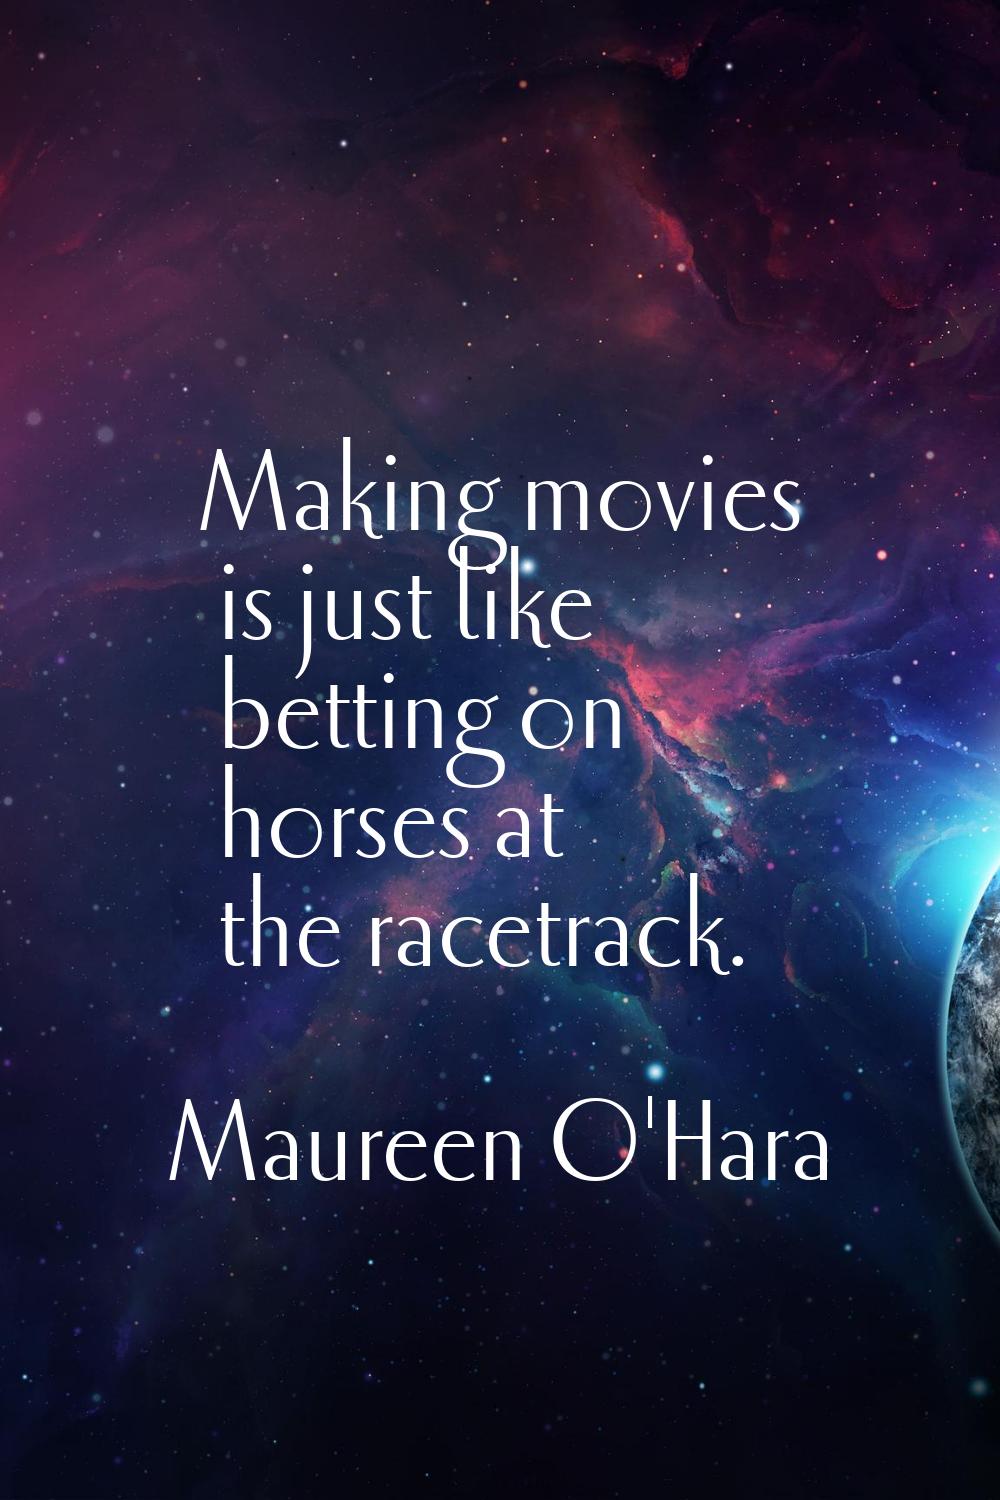 Making movies is just like betting on horses at the racetrack.